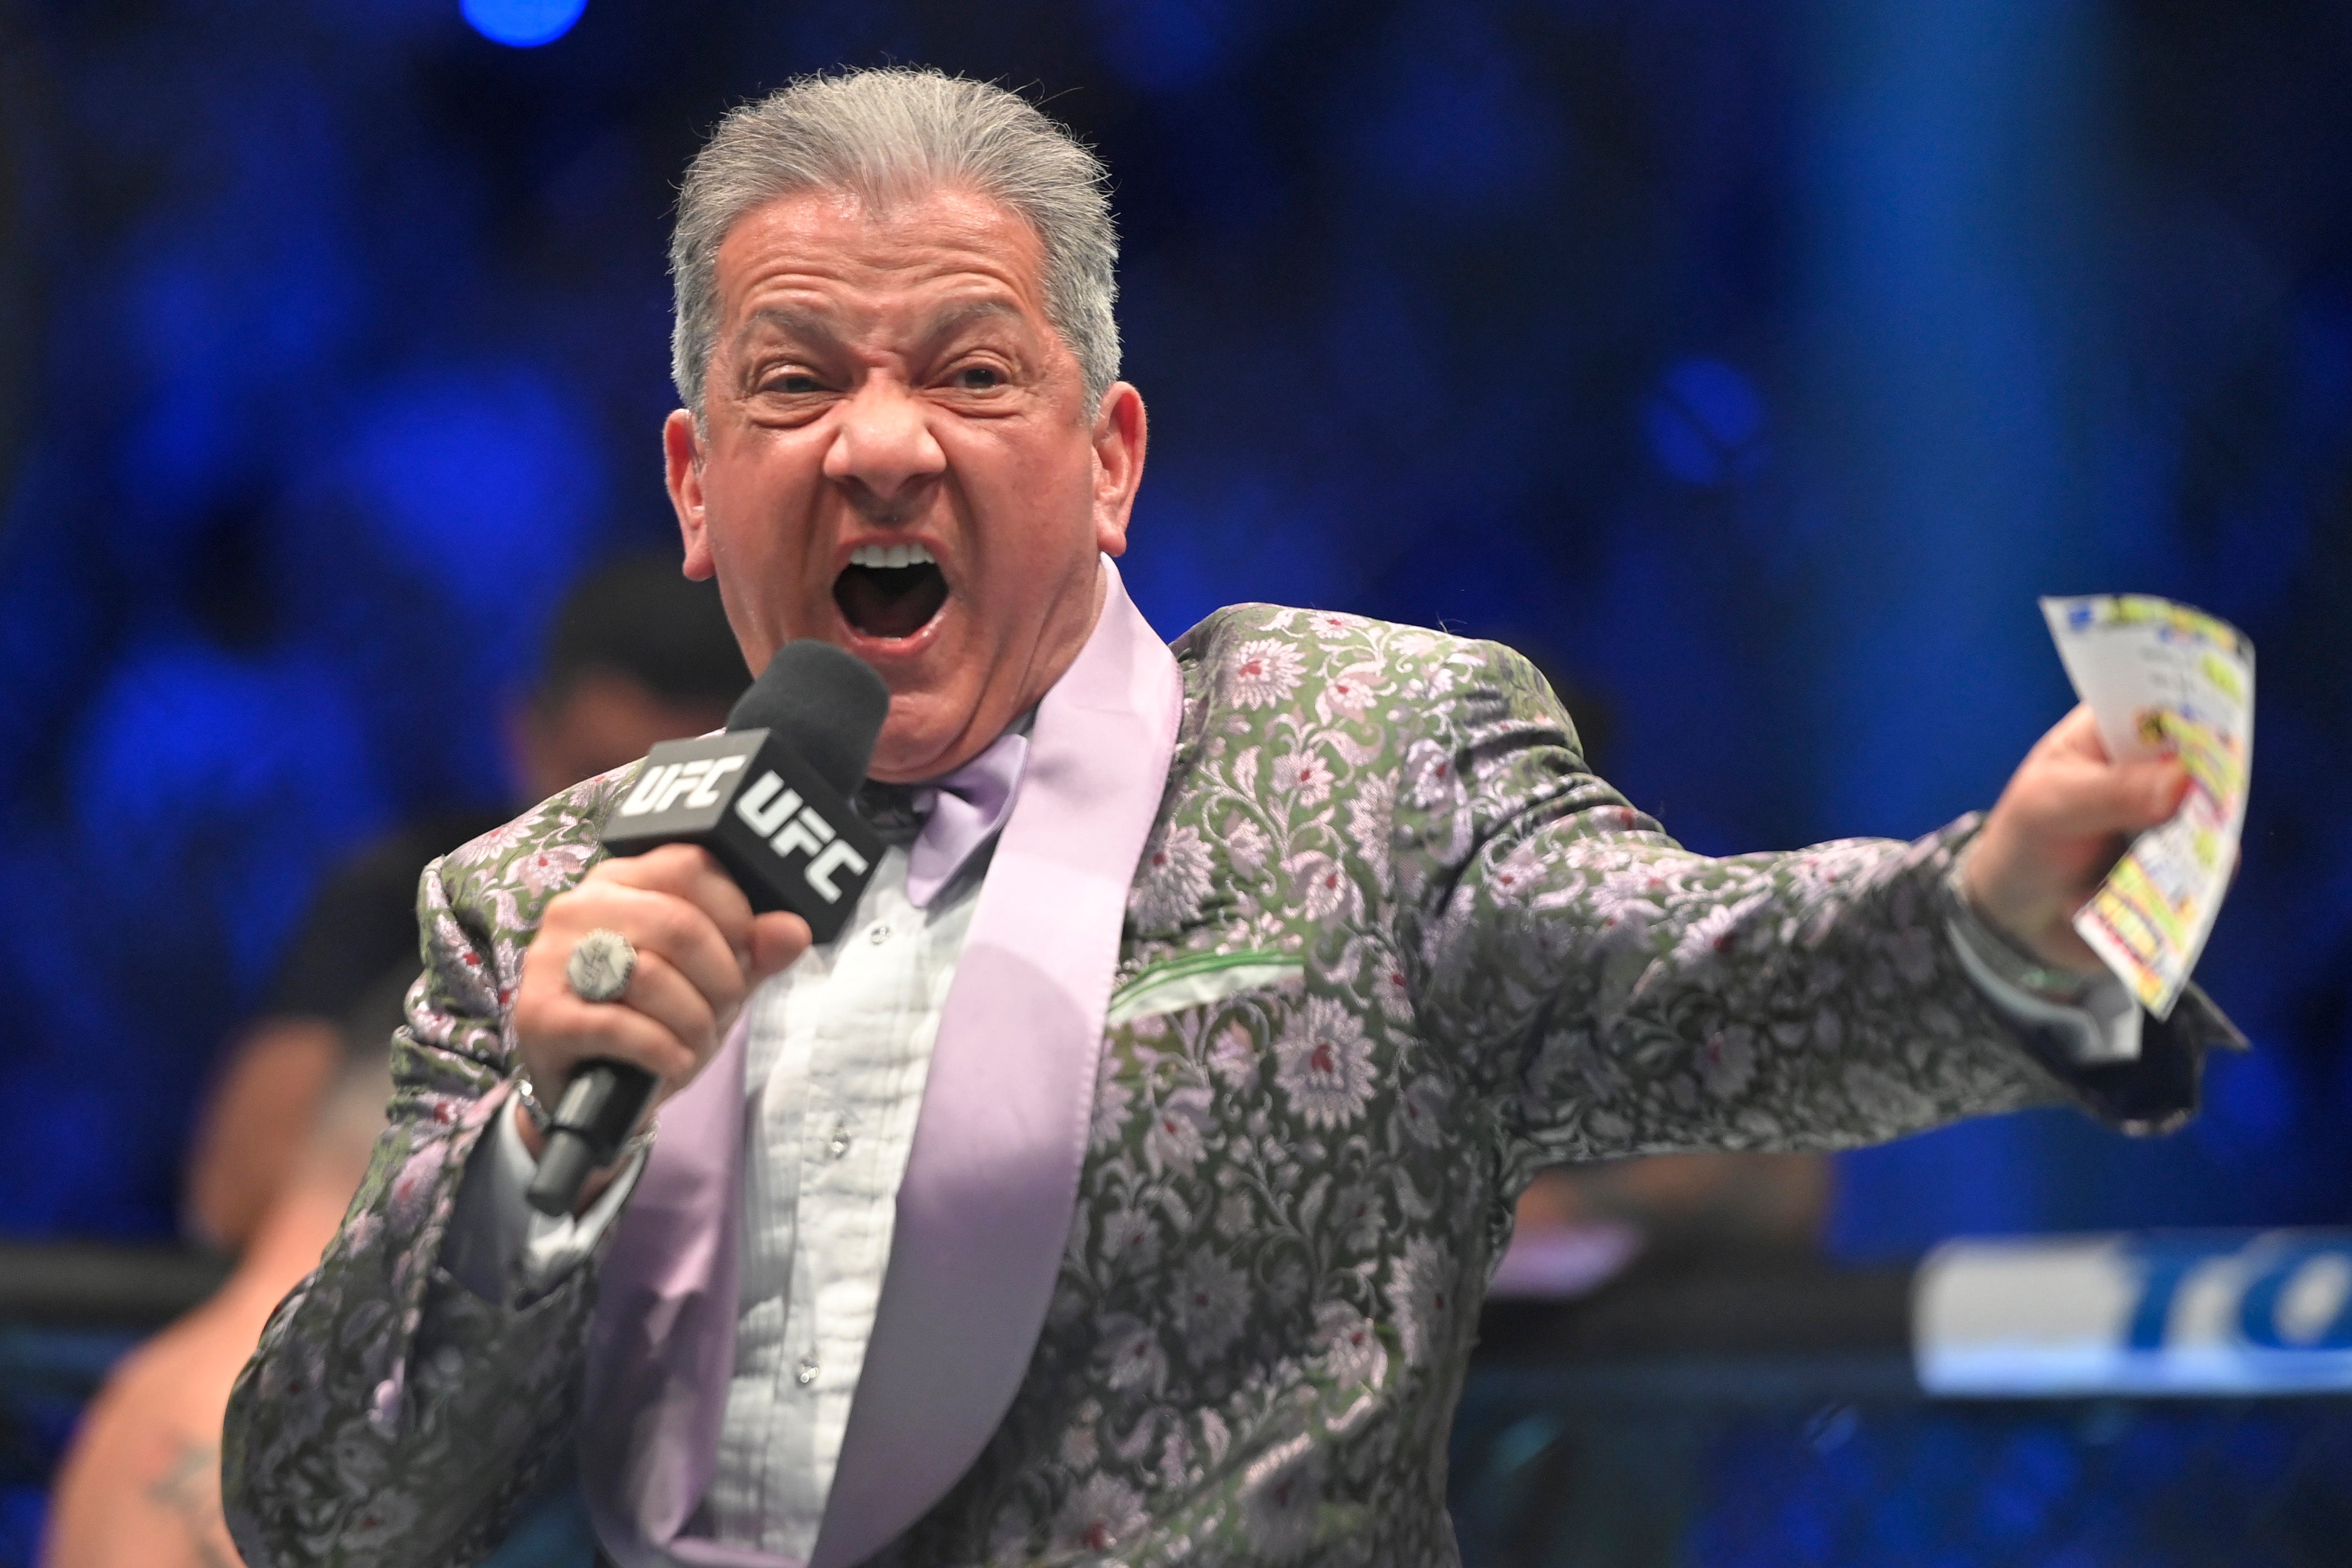 Buffer is the UFC’s go-to ring announcer